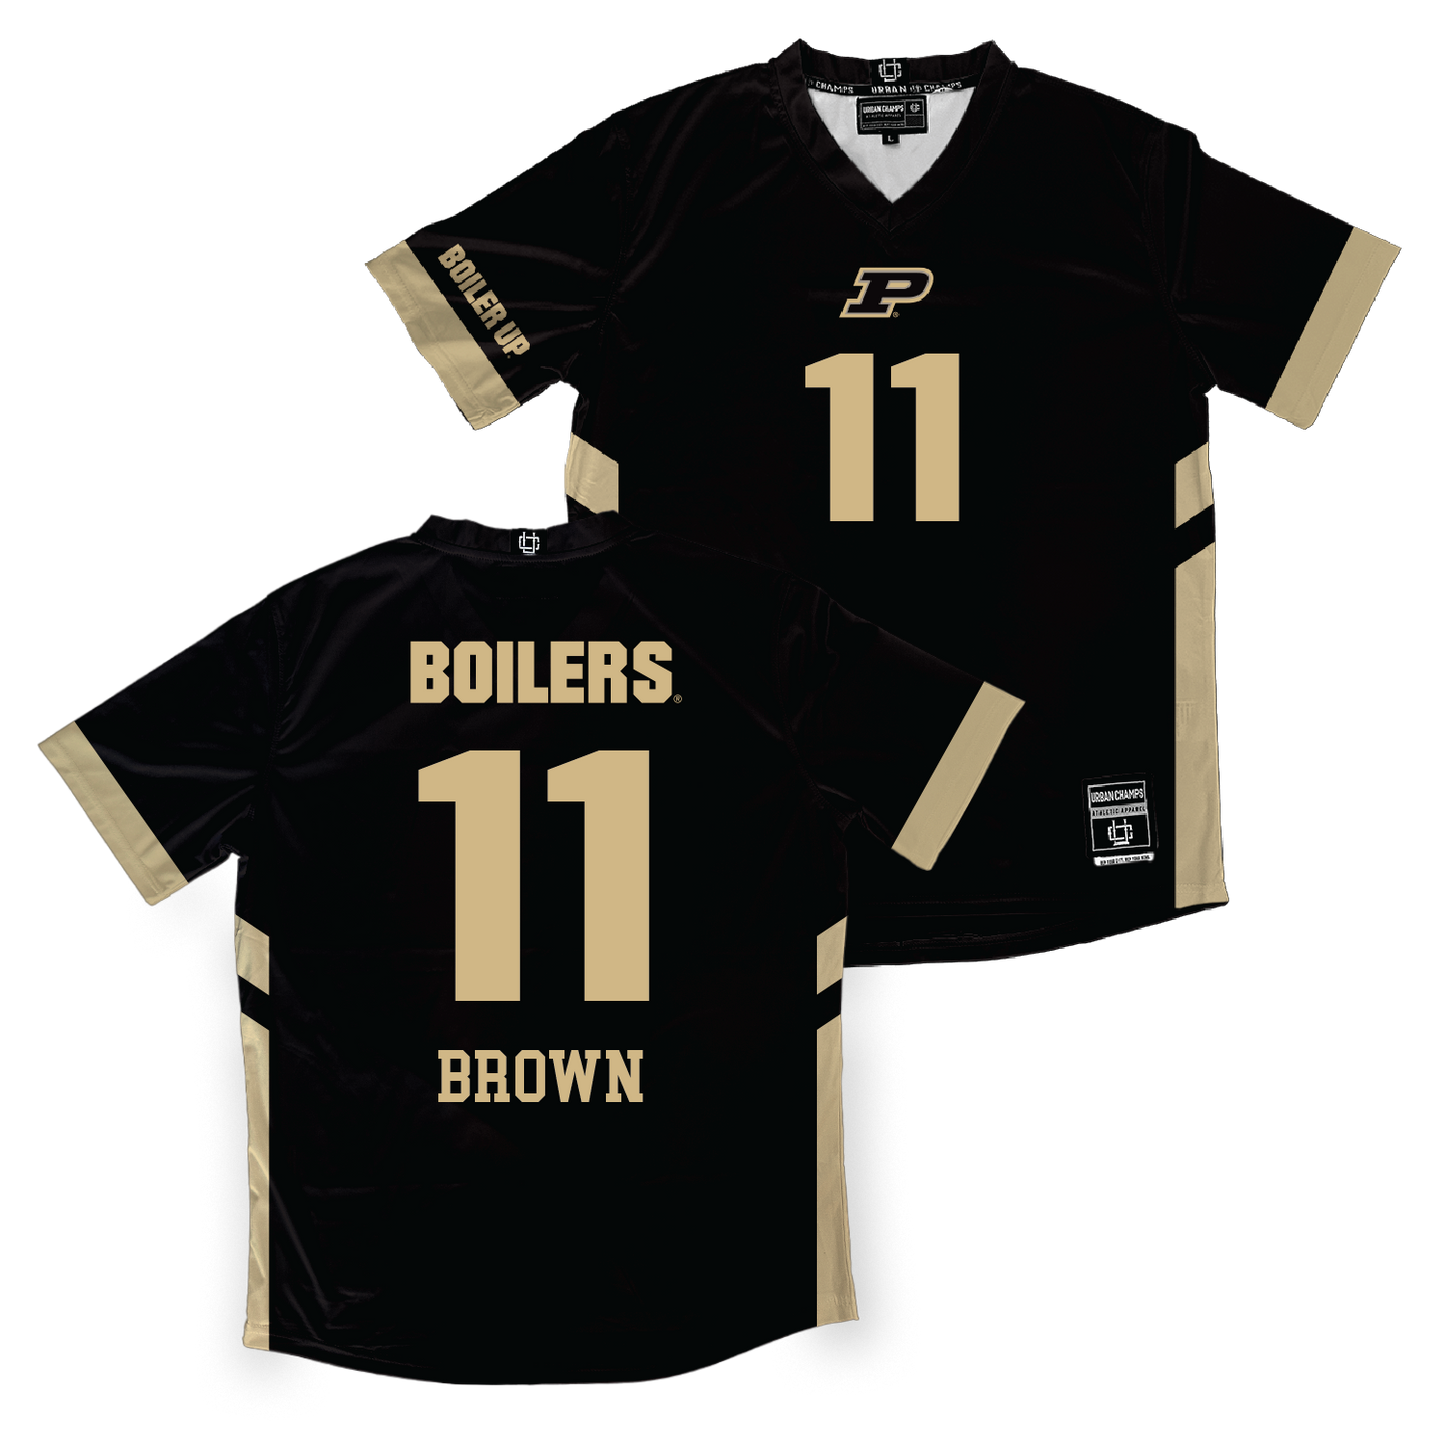 Black Purdue Women's Volleyball Jersey - Emily Brown | #11 Youth Small